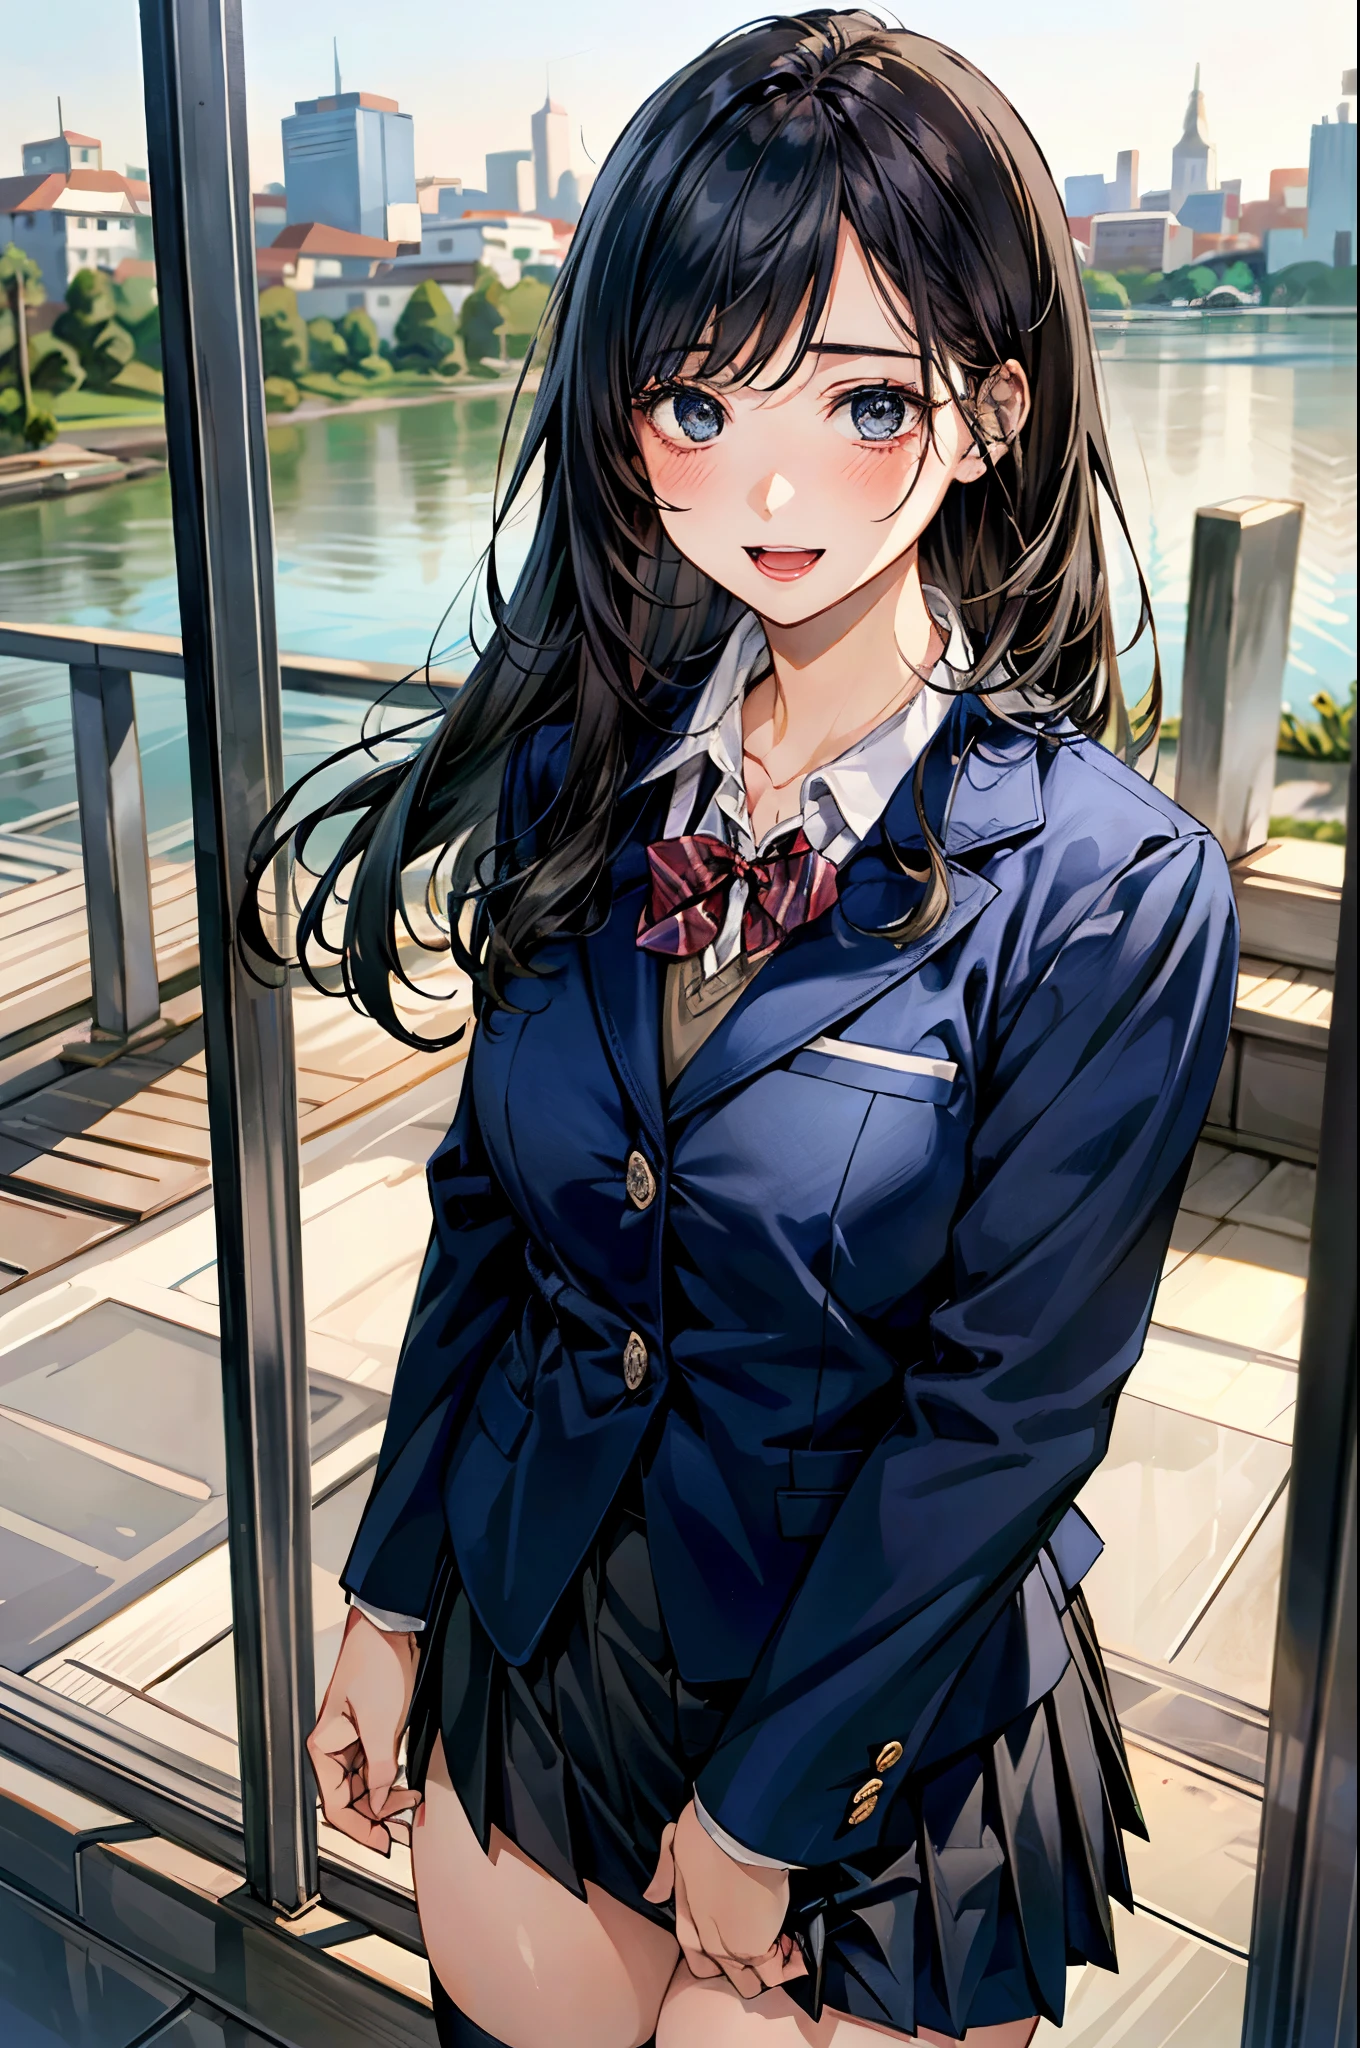 (masterpiece:1.2, top-quality), (realistic, photorealistic:1.4), beautiful illustration, (natural side lighting, movie lighting), , 
looking away, (face focus, upper body, front view:0.6), 1 girl, high school girl, japanese, perfect face, perfect anatomy, cute and symmetrical face, round face, shiny skin, 
(long hair:1.6, long_hime_cut_hairstyle:1.5, black hair), swept bangs, blue eyes, big eyes, long eye lasher, (large breasts, thick thighs, big ass), nipple hardening, 
beautiful hair, beautiful face, beautiful detailed eyes, beautiful clavicle, beautiful body, beautiful chest, beautiful thigh, beautiful legs, beautiful fingers, 
(((navy clothes), school blazer, closed blazer, white collared shirts, navy pleated mini skirt), dark red bow tie, gray thigh-highs), 
(beautiful scenery), depth of field, morning, (riverside, cityscape in the distance), standing, hands on own chest, (lovely smile, open mouth), 